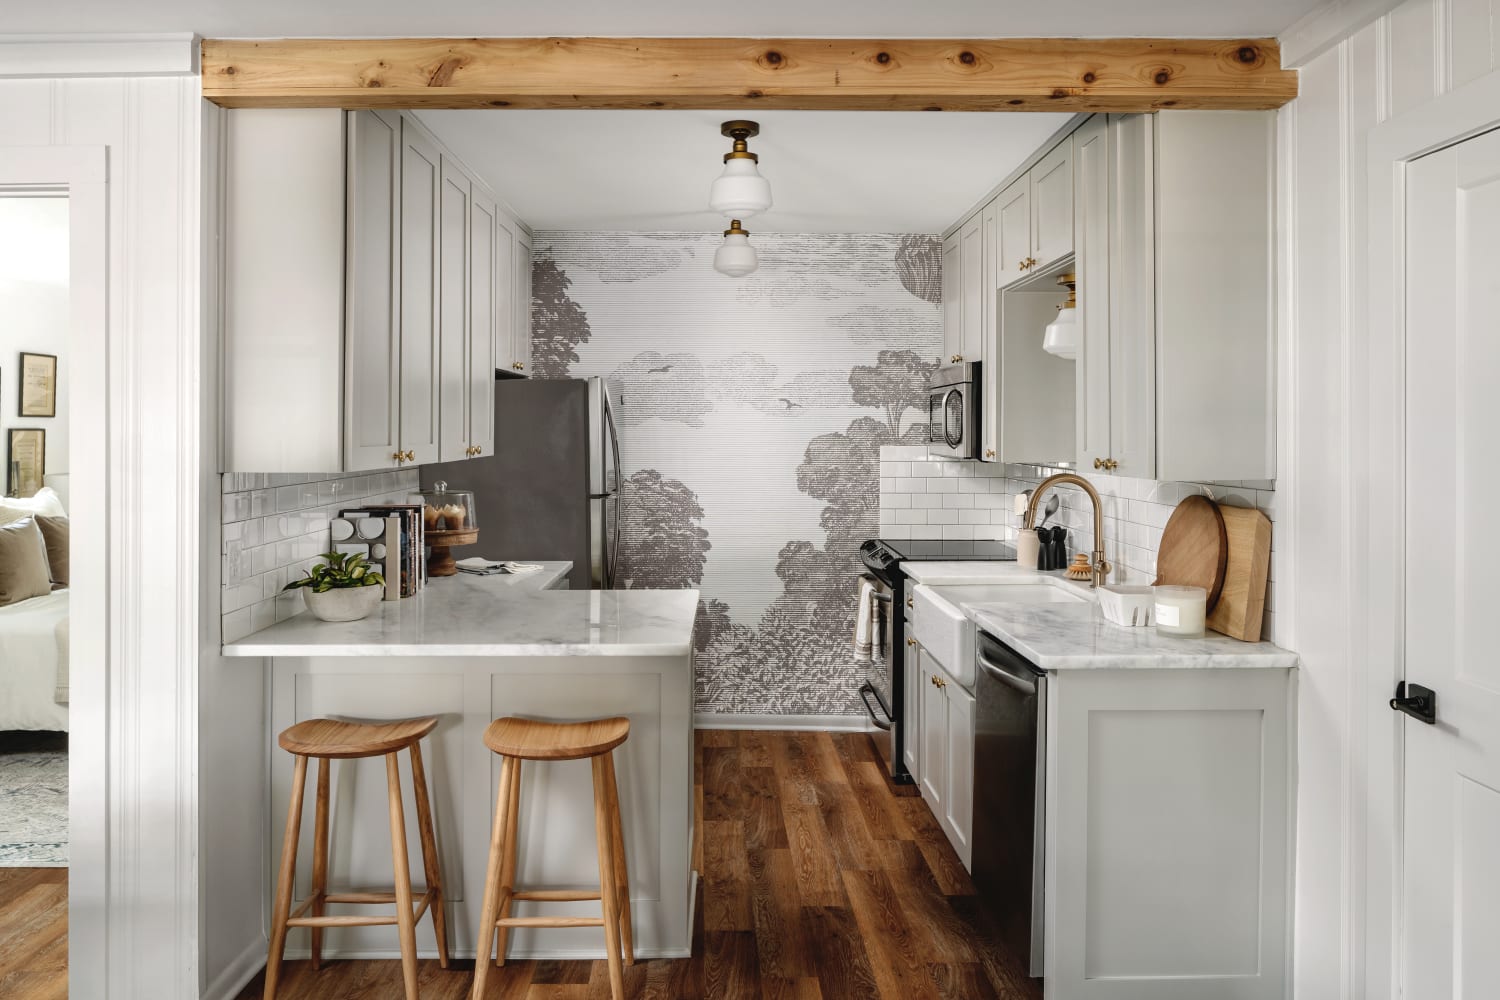 Gorgeous Joanna Gaines  kitchen with light grey cabinets and mural at Magnolia House in McGregor, TX.